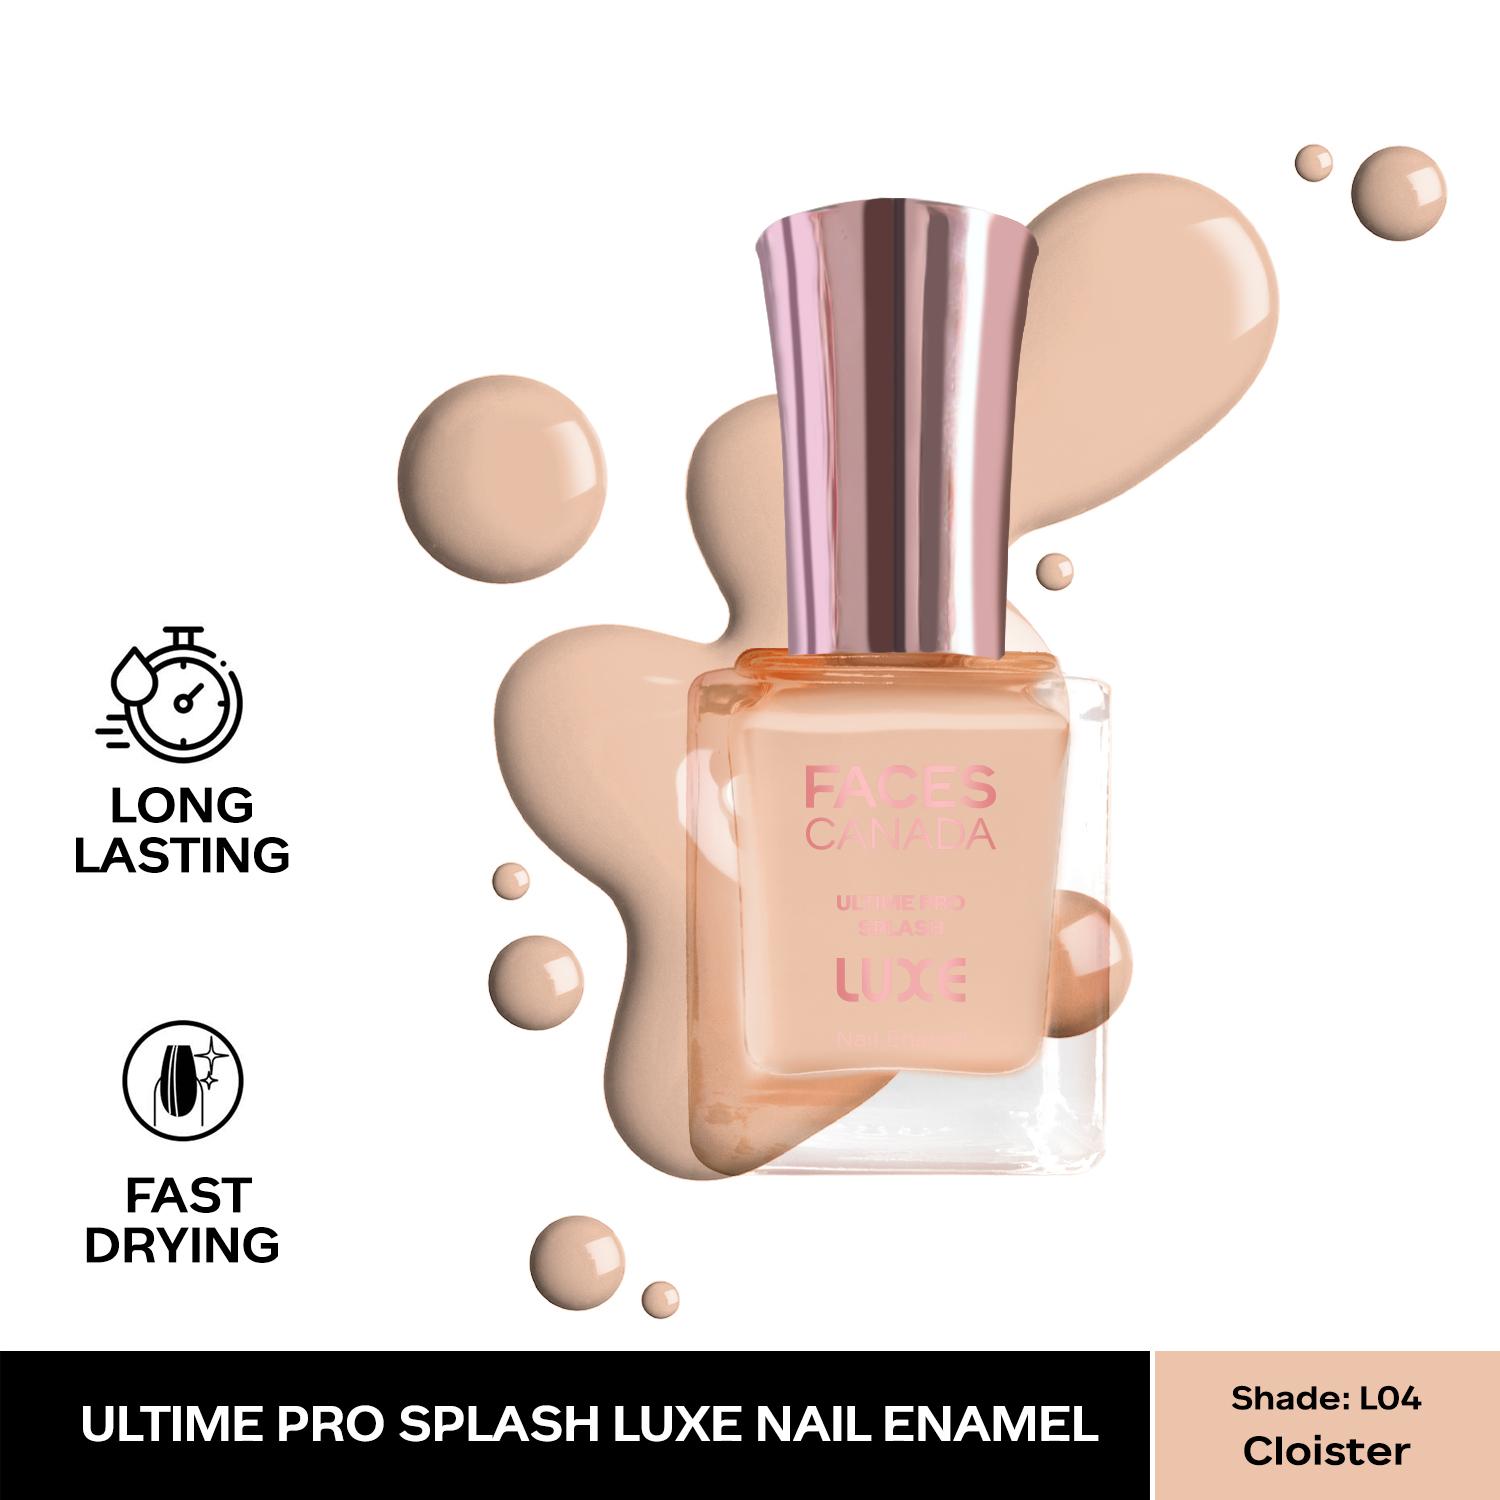 Faces Canada | Faces Canada Ultime Pro Splash Luxe Nail Enamel - Cloister (L04), Glossy Finish (12 ml)